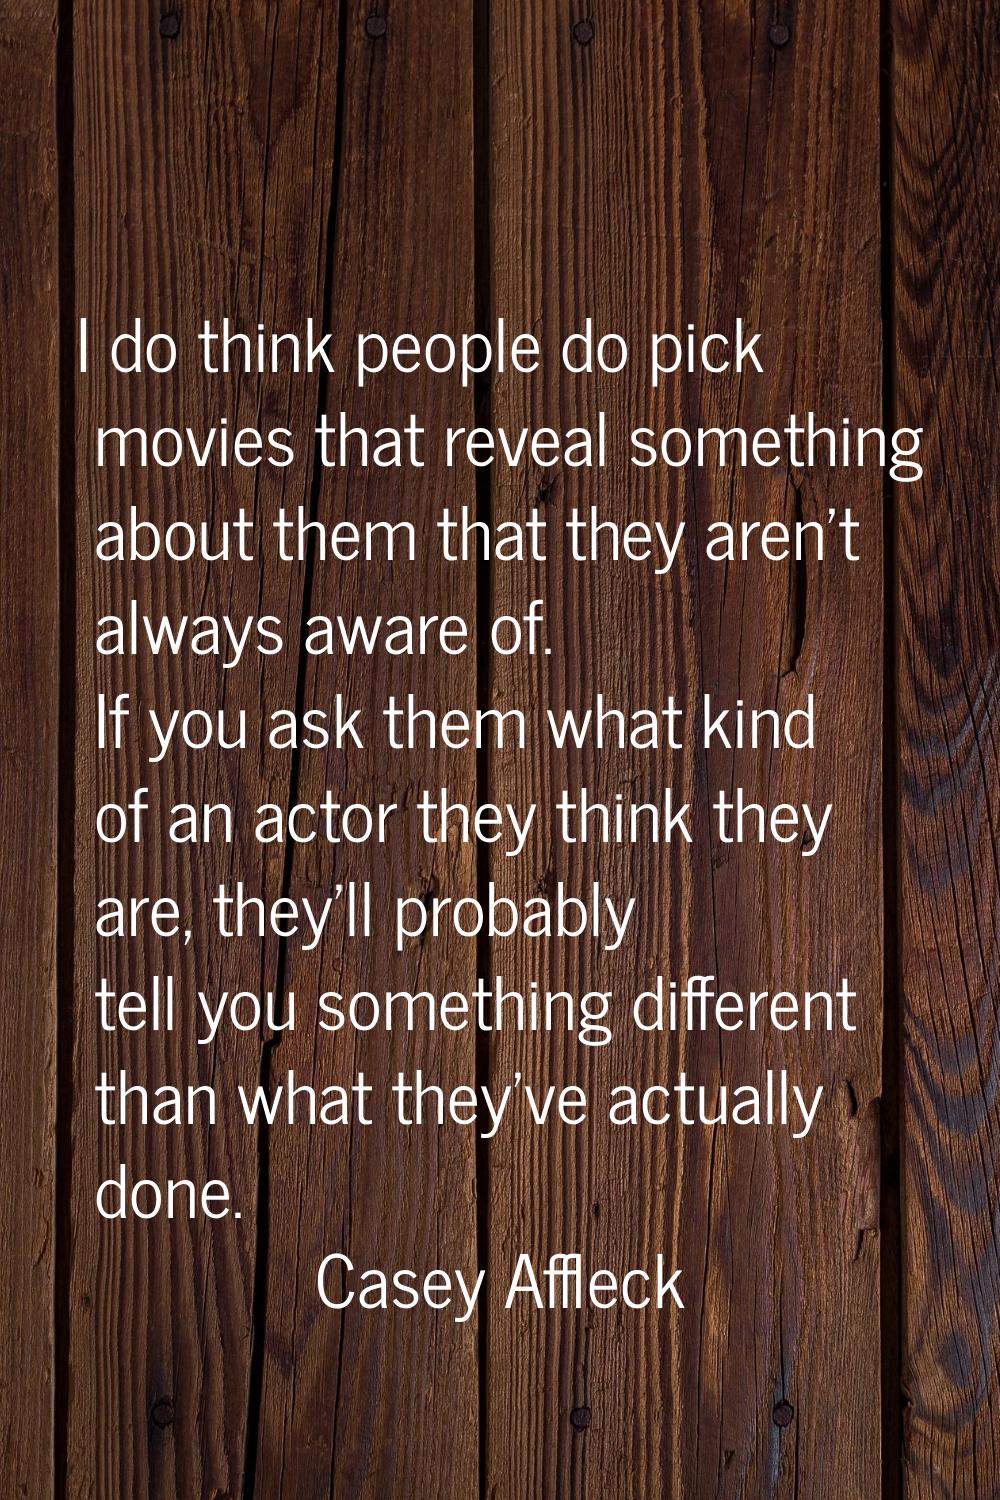 I do think people do pick movies that reveal something about them that they aren't always aware of.